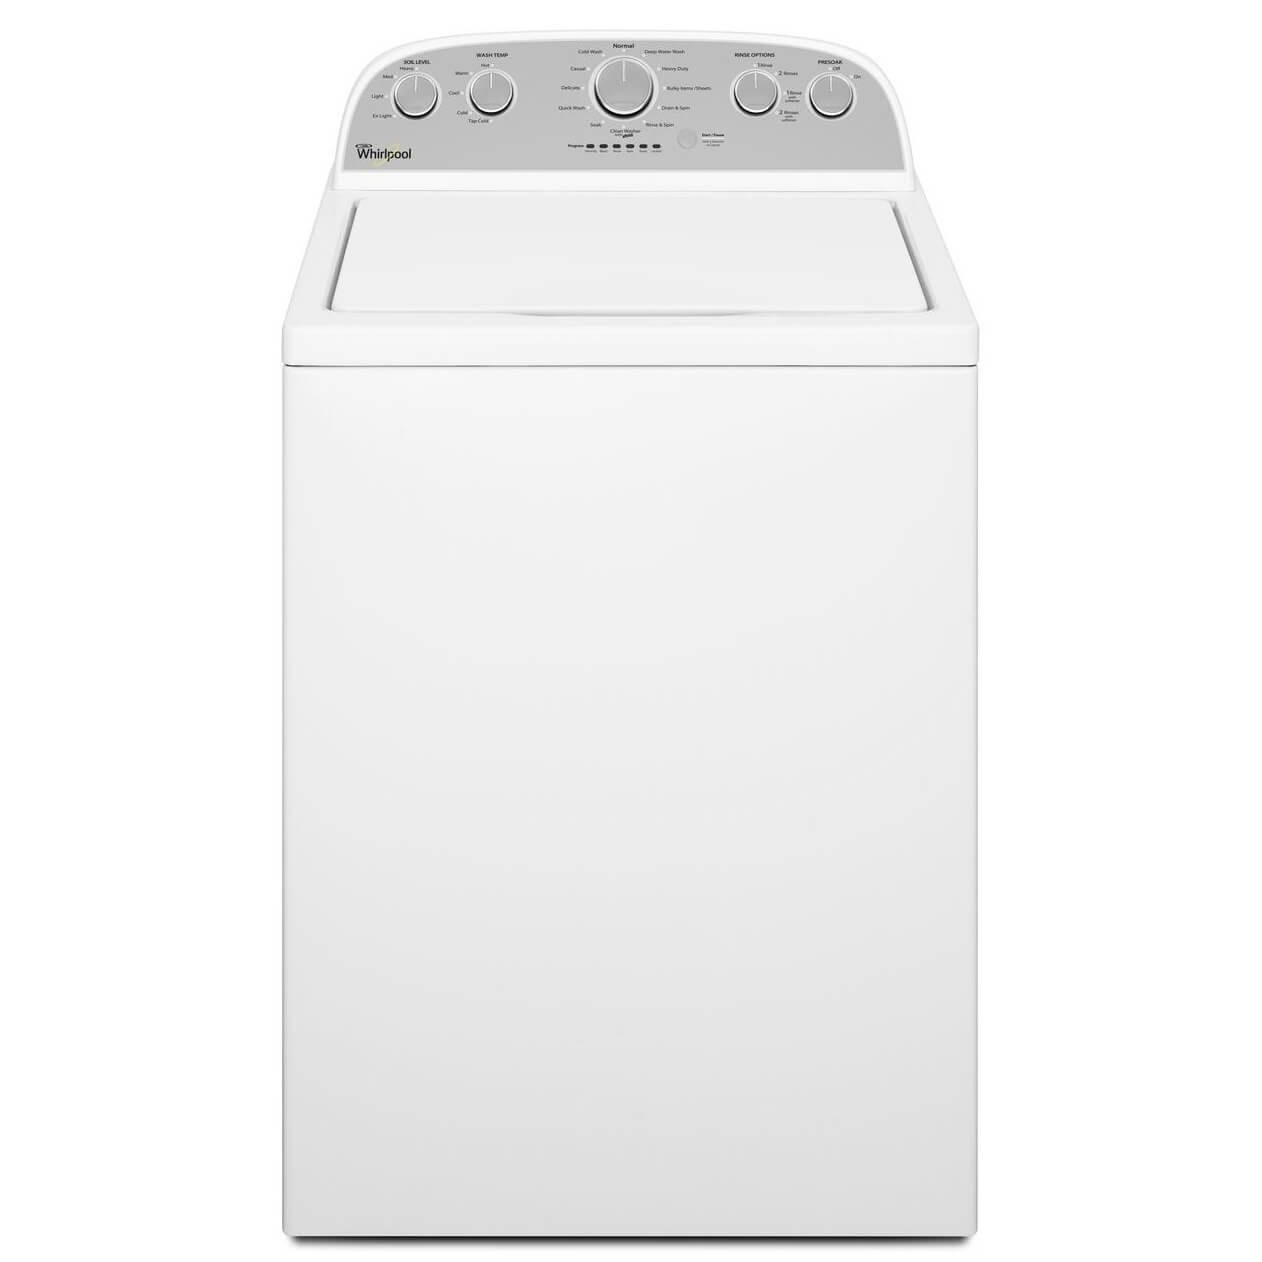 Whirlpool 4.3 Cu. Ft. White High-Efficiency Top Loading Washer - WTW5000DW